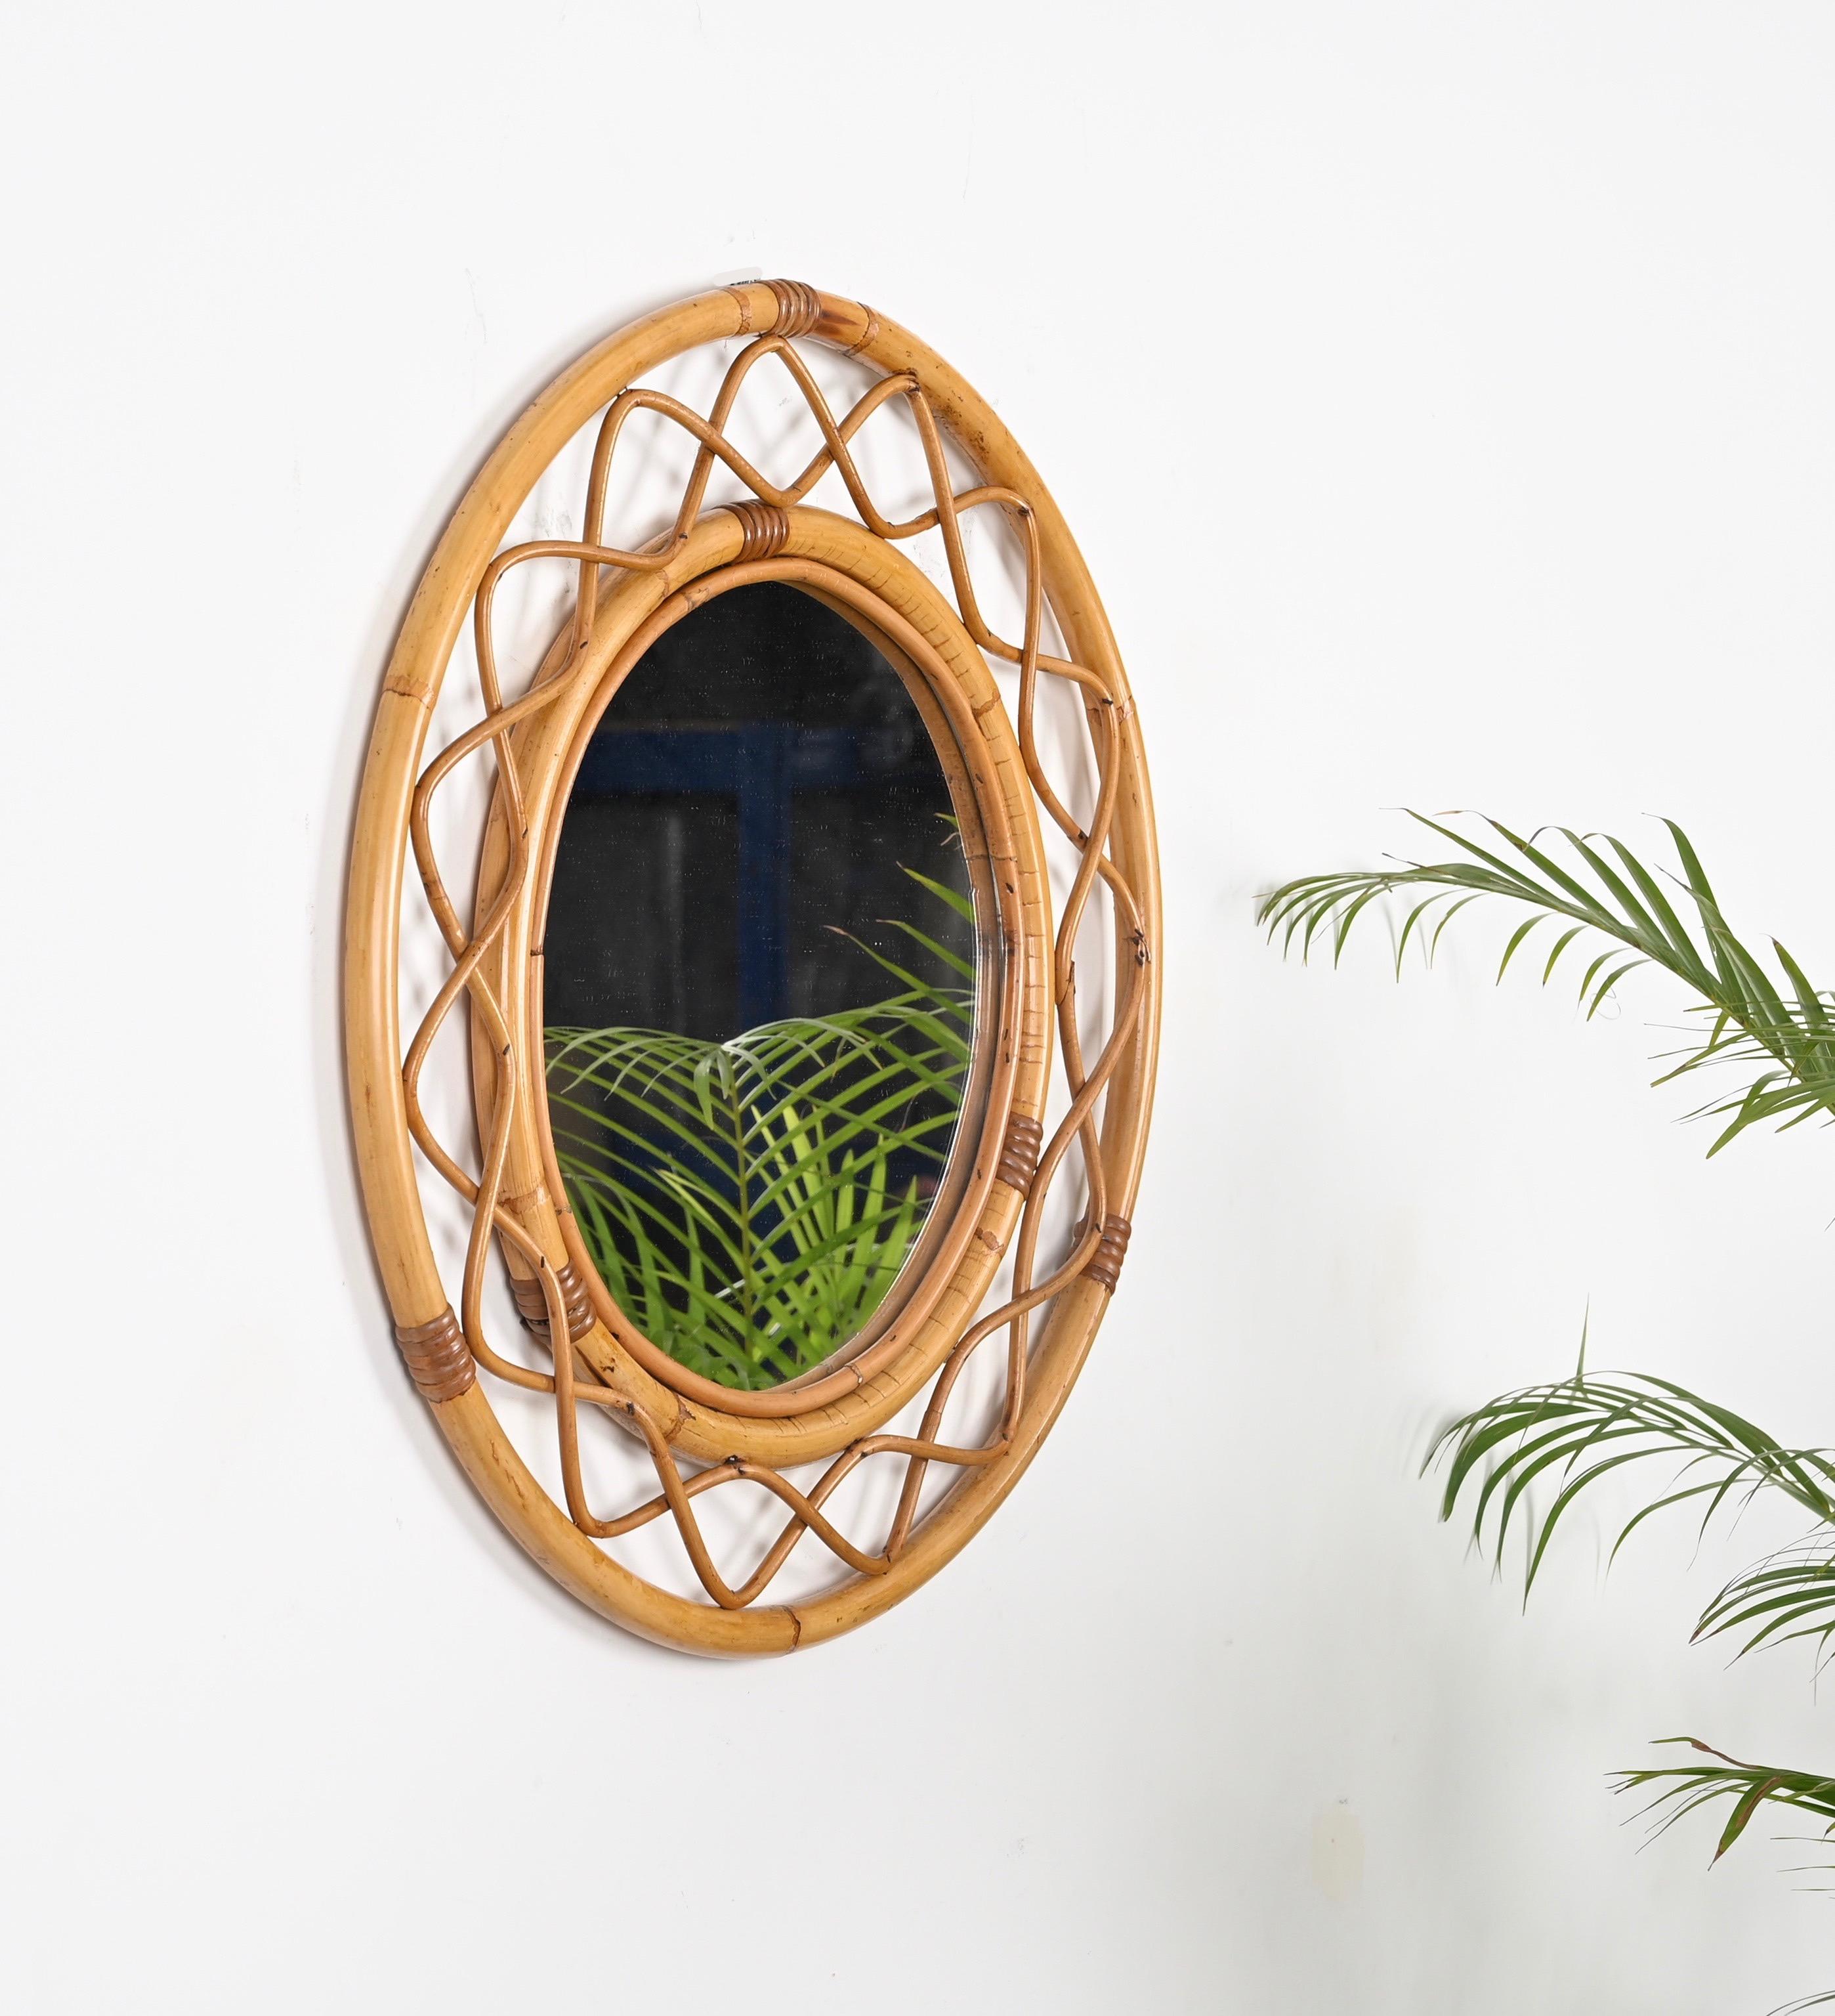 Stunning midcentury French Riviera style round mirror fully made in bamboo, rattan and wicker. This charming organic mirror was hand-made in Italy during the 1960s. 

This stunning mirror feature a double round frame in curved bamboo which is